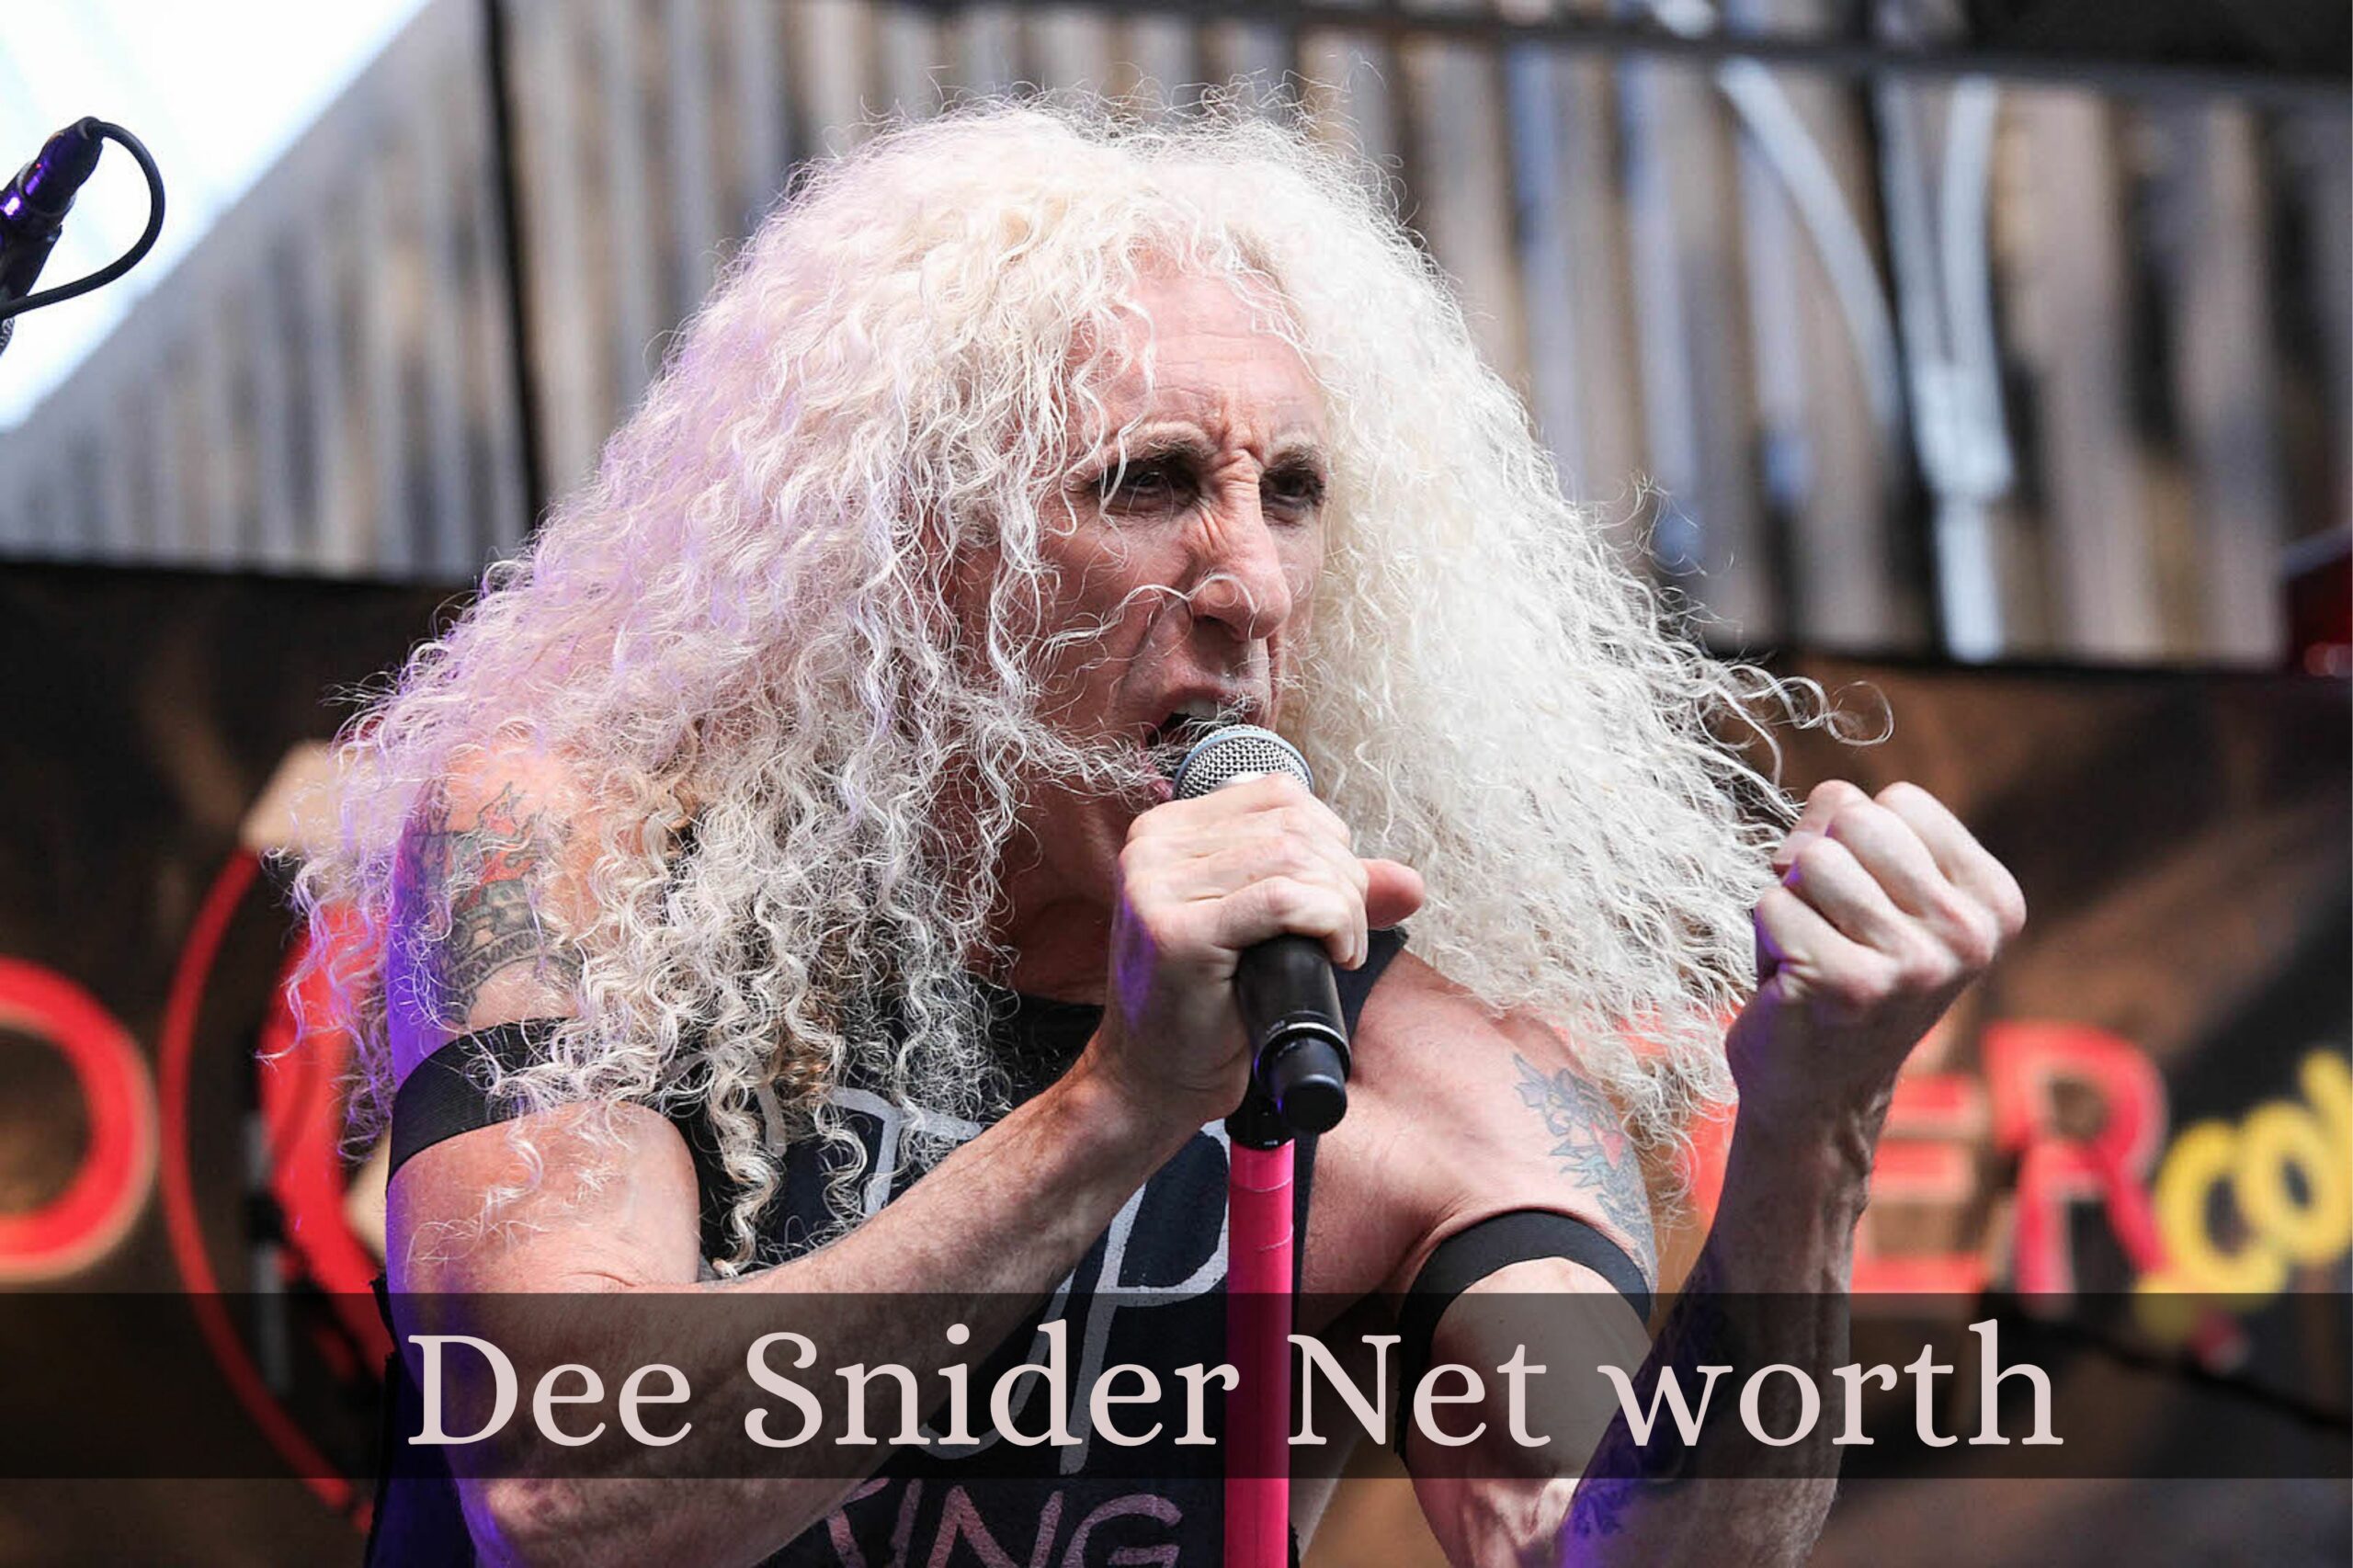 Dee Snider Net worth 2022, Early Life And Professional Career With Twisted Sister!